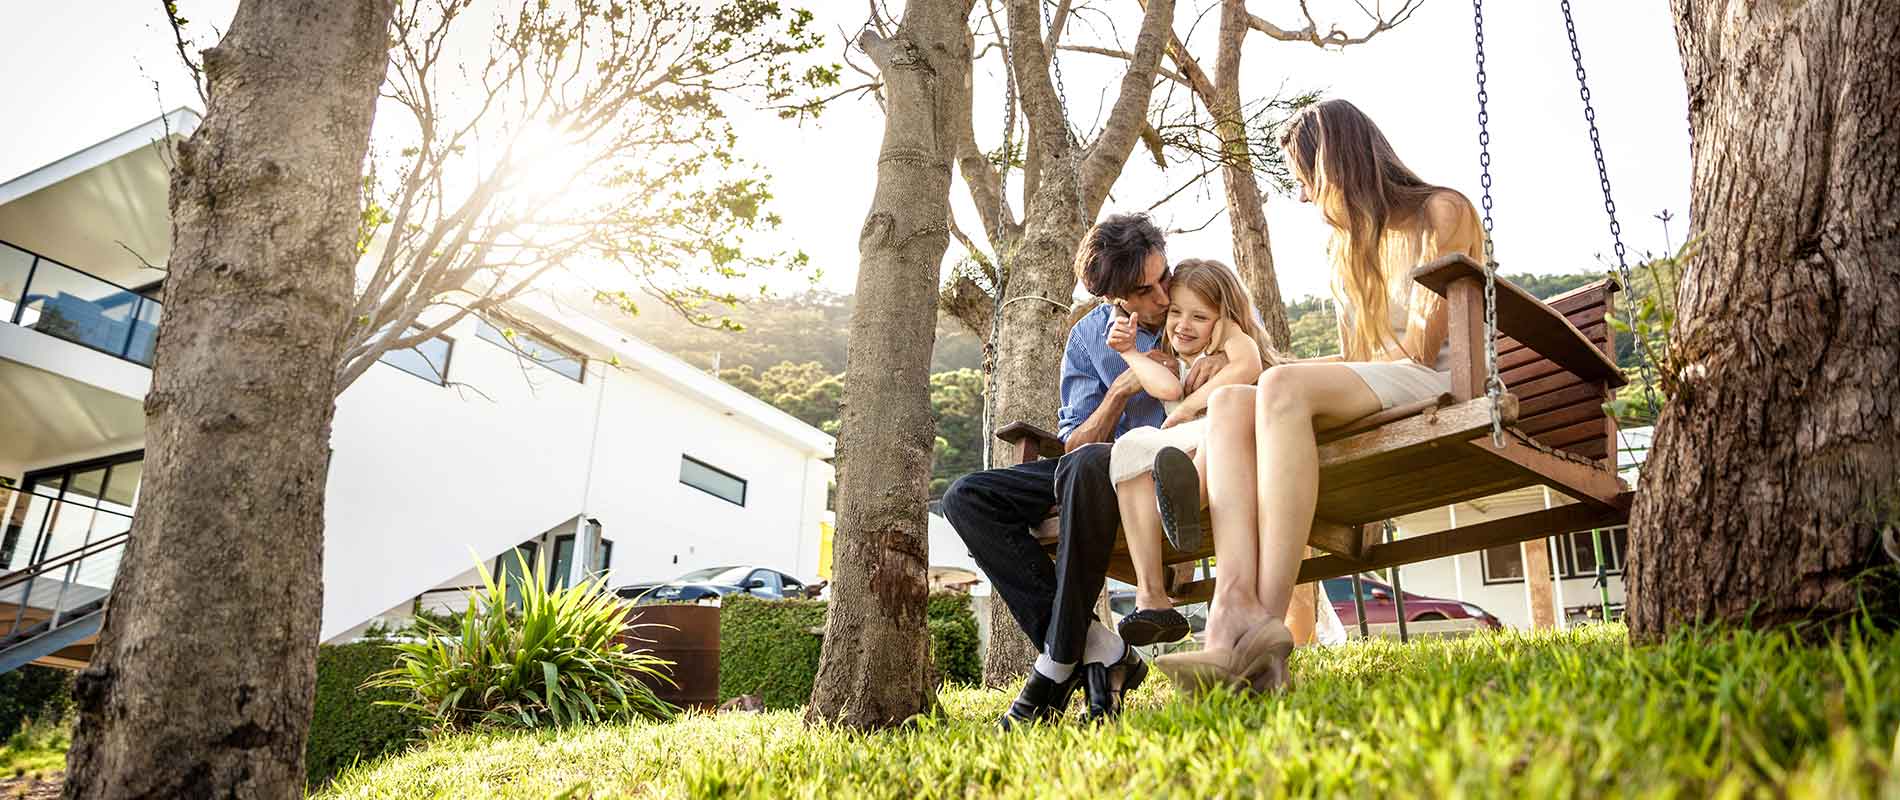 A young family with the child in the middle sits on a Hollywood swing as the father pulls his daughter to the left to kiss her hair while the mother smiles happily. The sun shines through the surrounding trees and a modern apartment building is recognizable in the background with green hills farther behind.